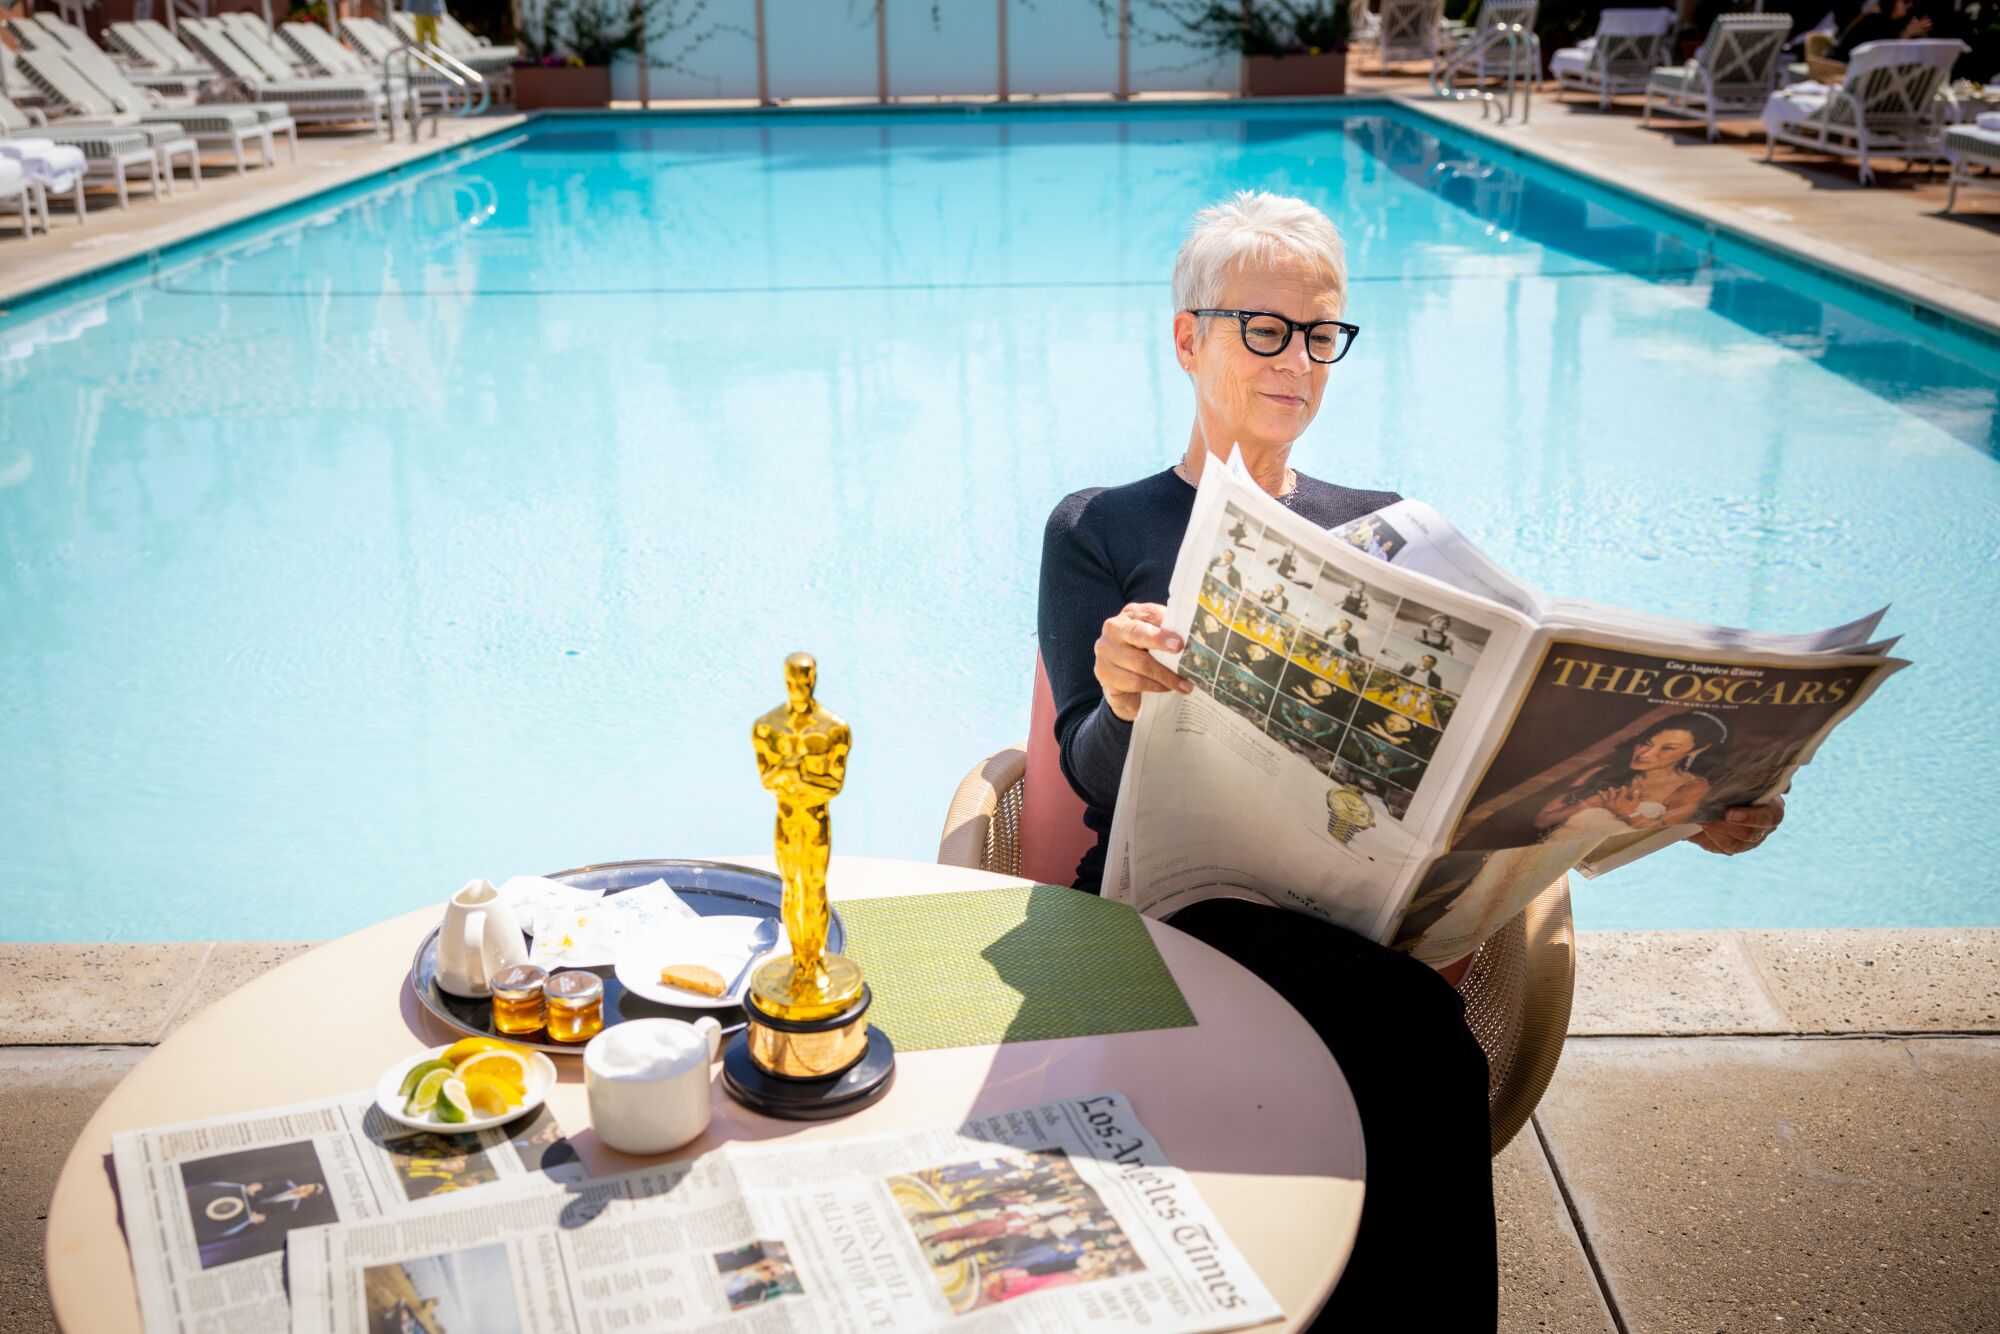 A woman in glasses looks at a newspaper section. On the table is her Oscar.